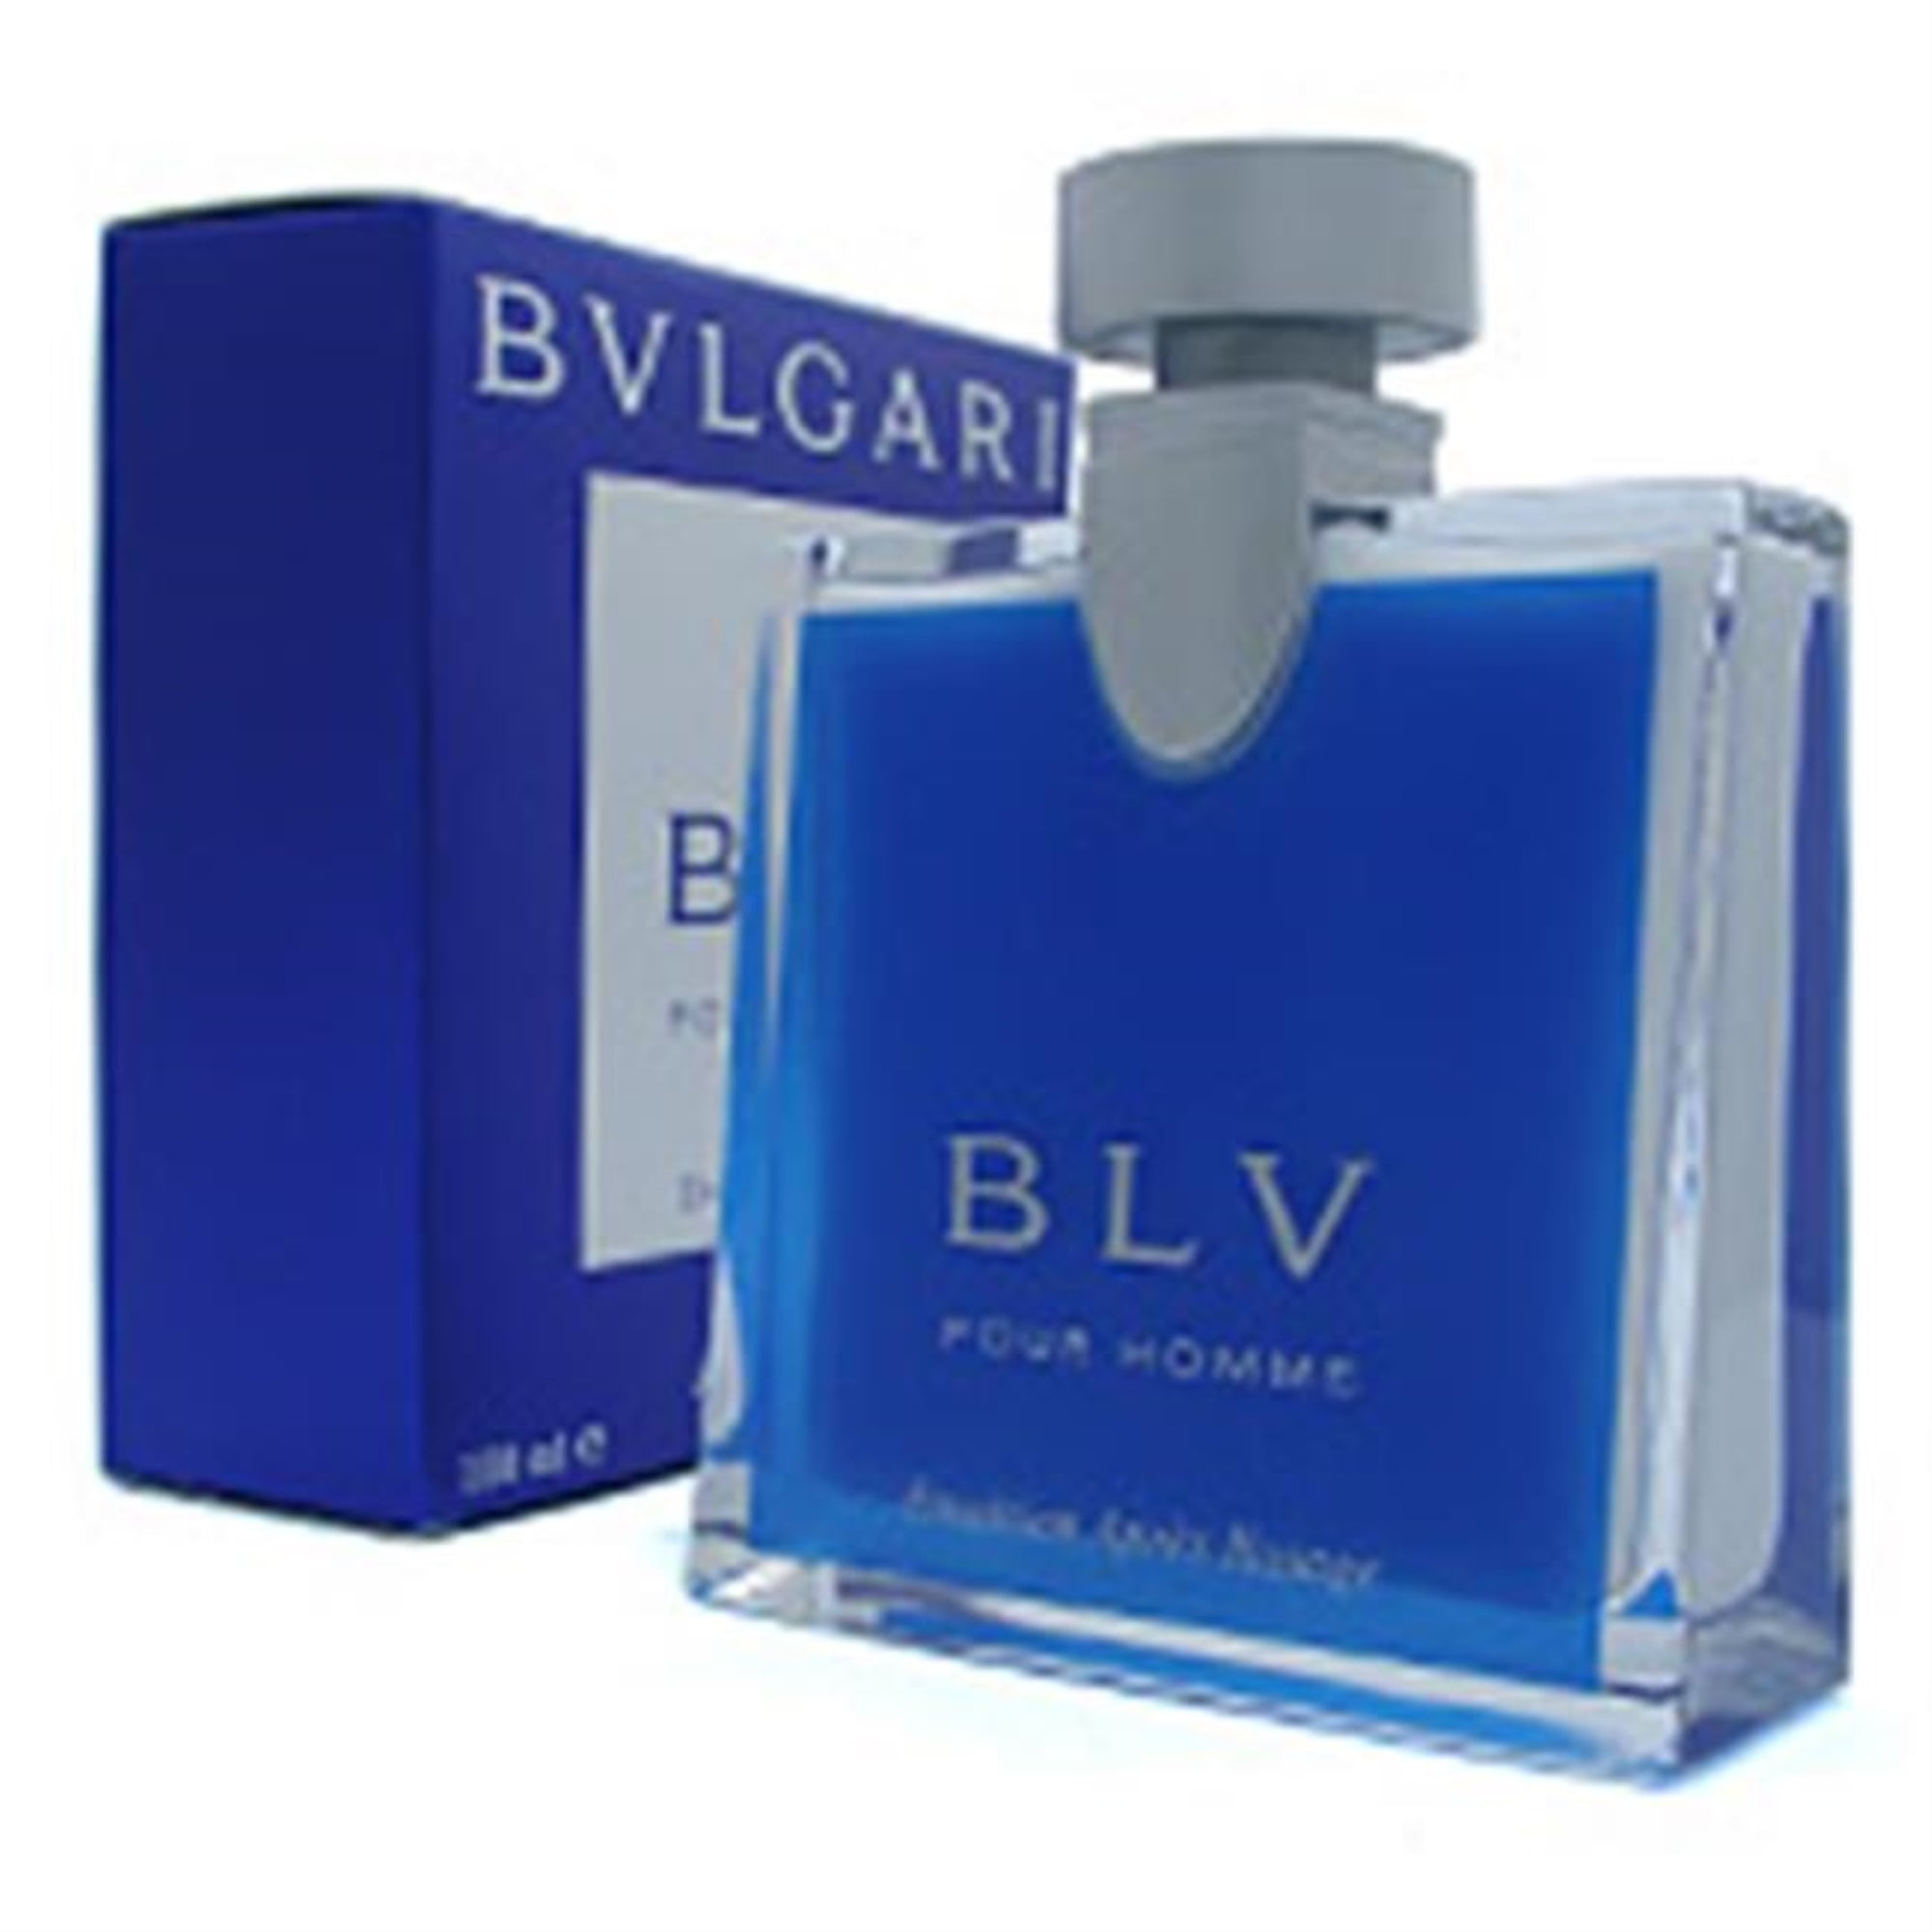 bvlgari blv aftershave